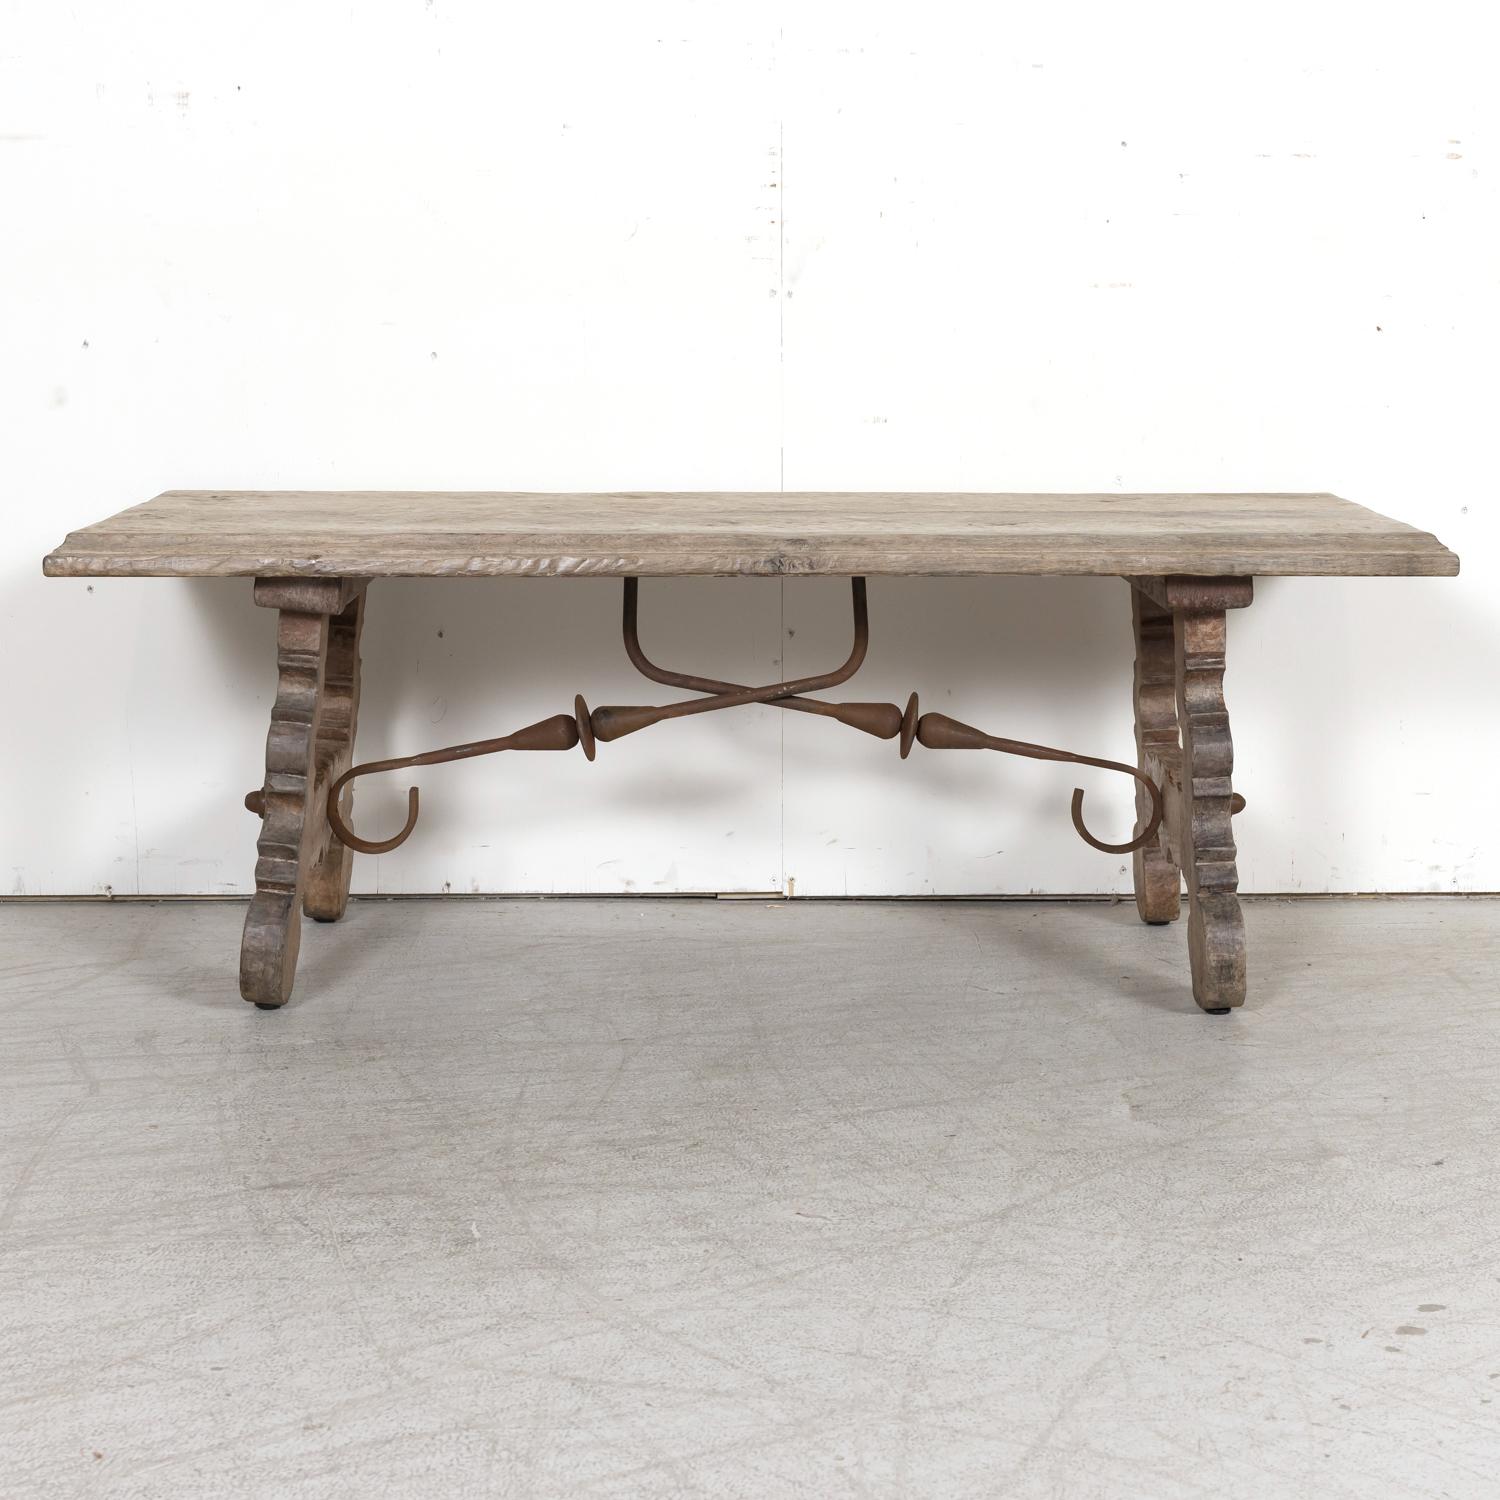 19th Century Spanish Baroque Style Bleached Oak Coffee Table with Iron Stretcher In Good Condition For Sale In Birmingham, AL